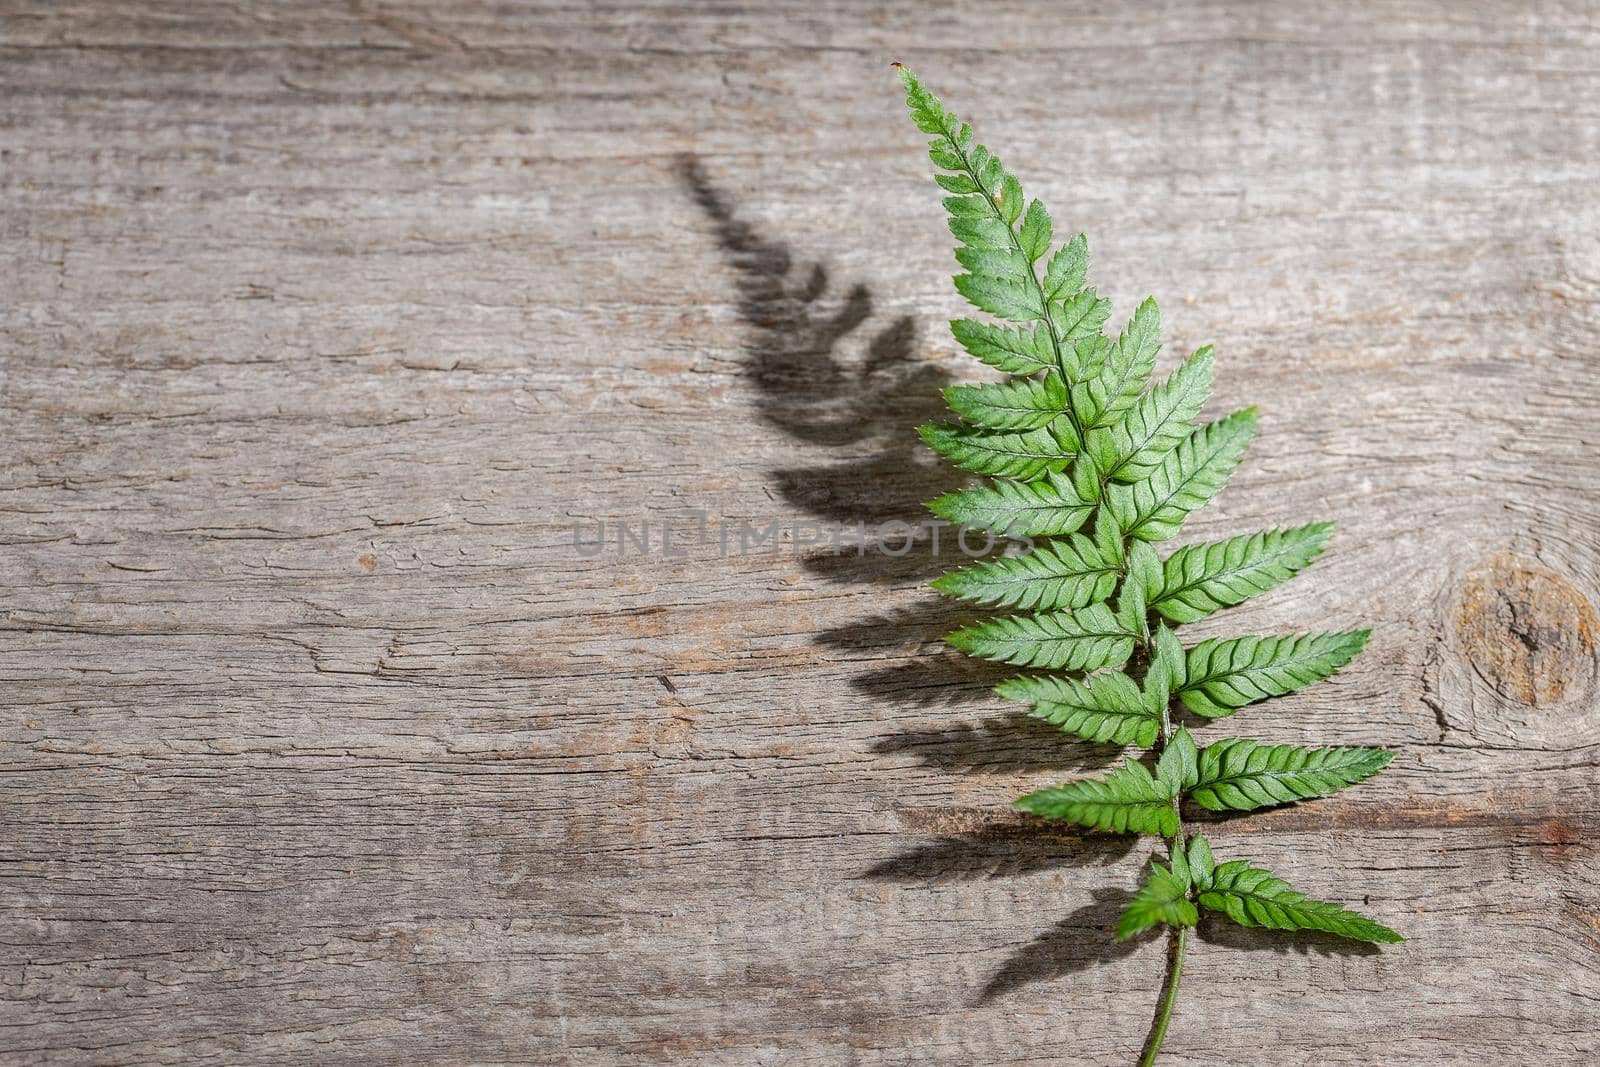 Fern leaf with hursh shadow on wooden background by Syvanych